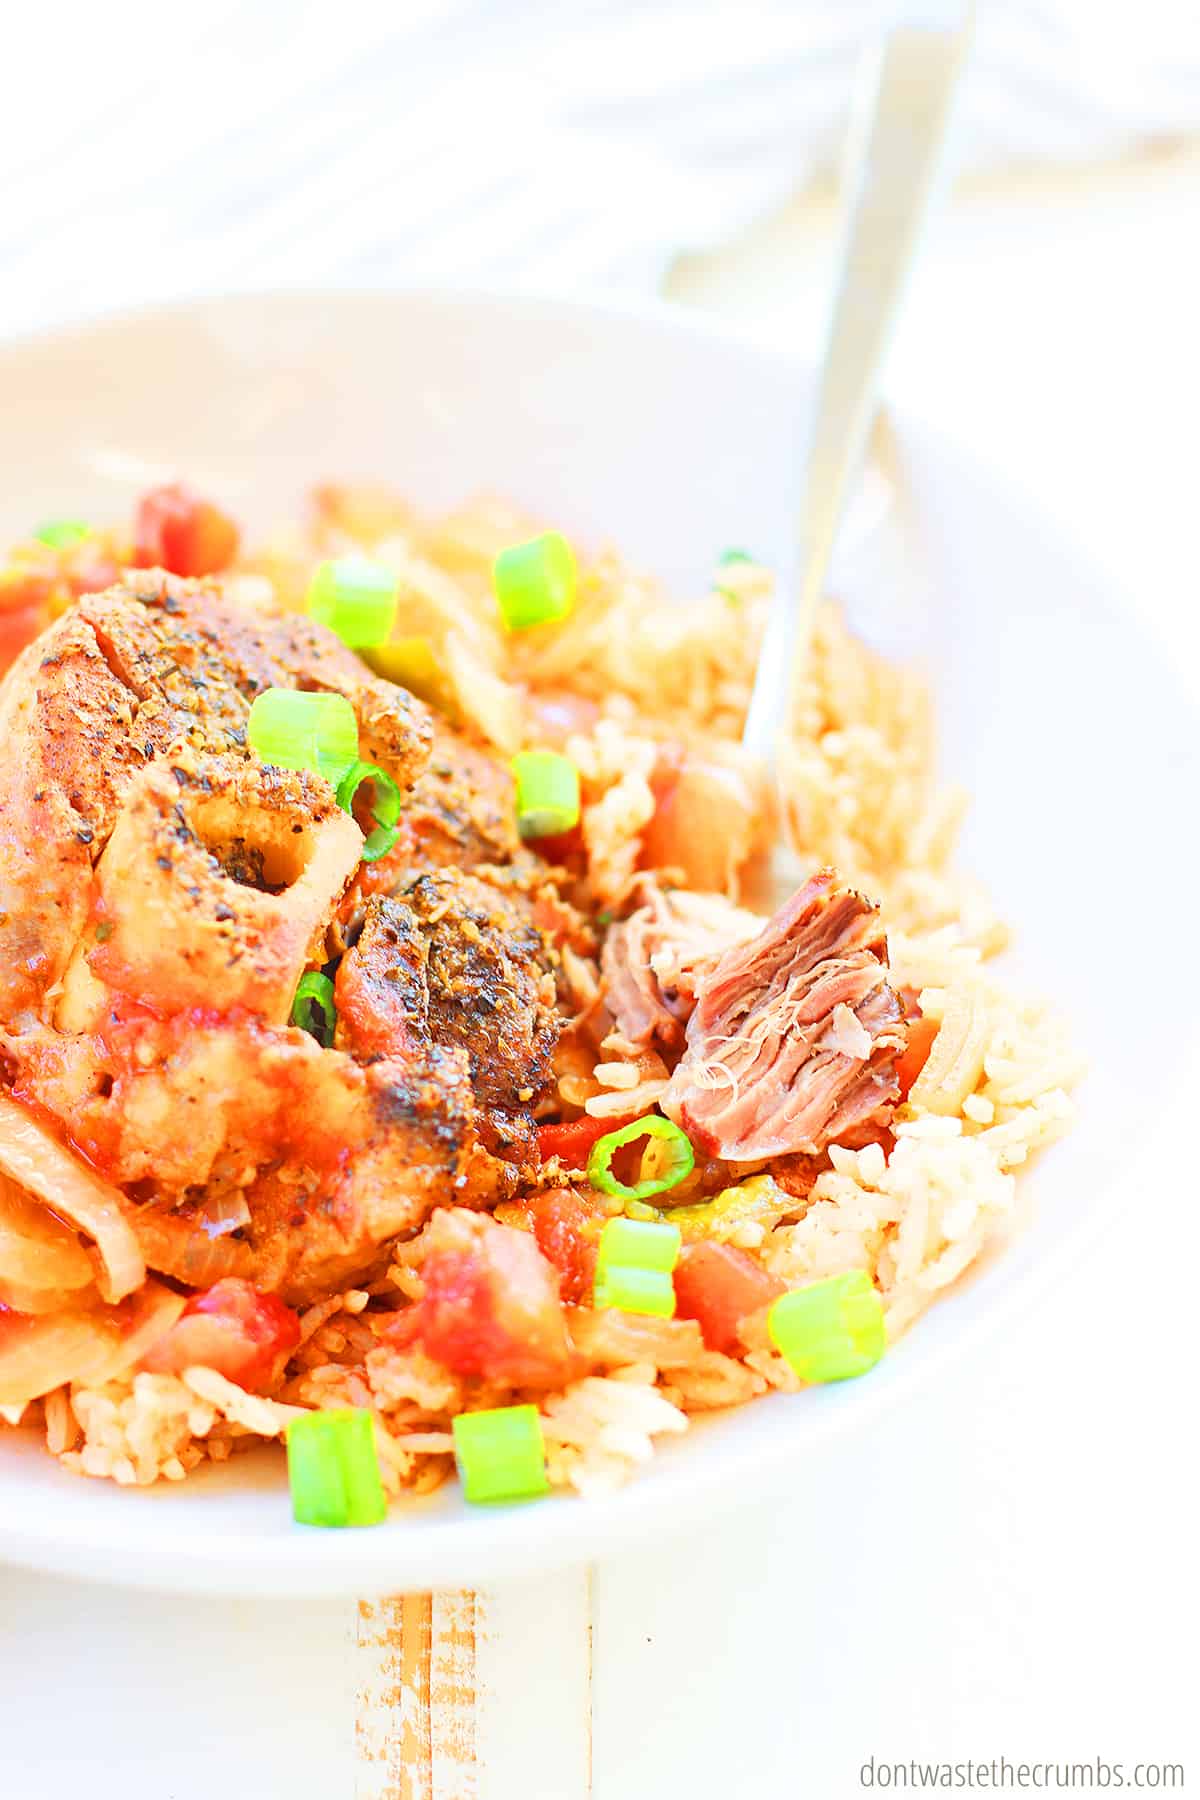 Enjoy fork-tender, juicy meat in your crock pot osso bucco dish. Use whatever meat you have on hand - pork, beef or veal and serve with potatoes, rice or noodles. YUM!